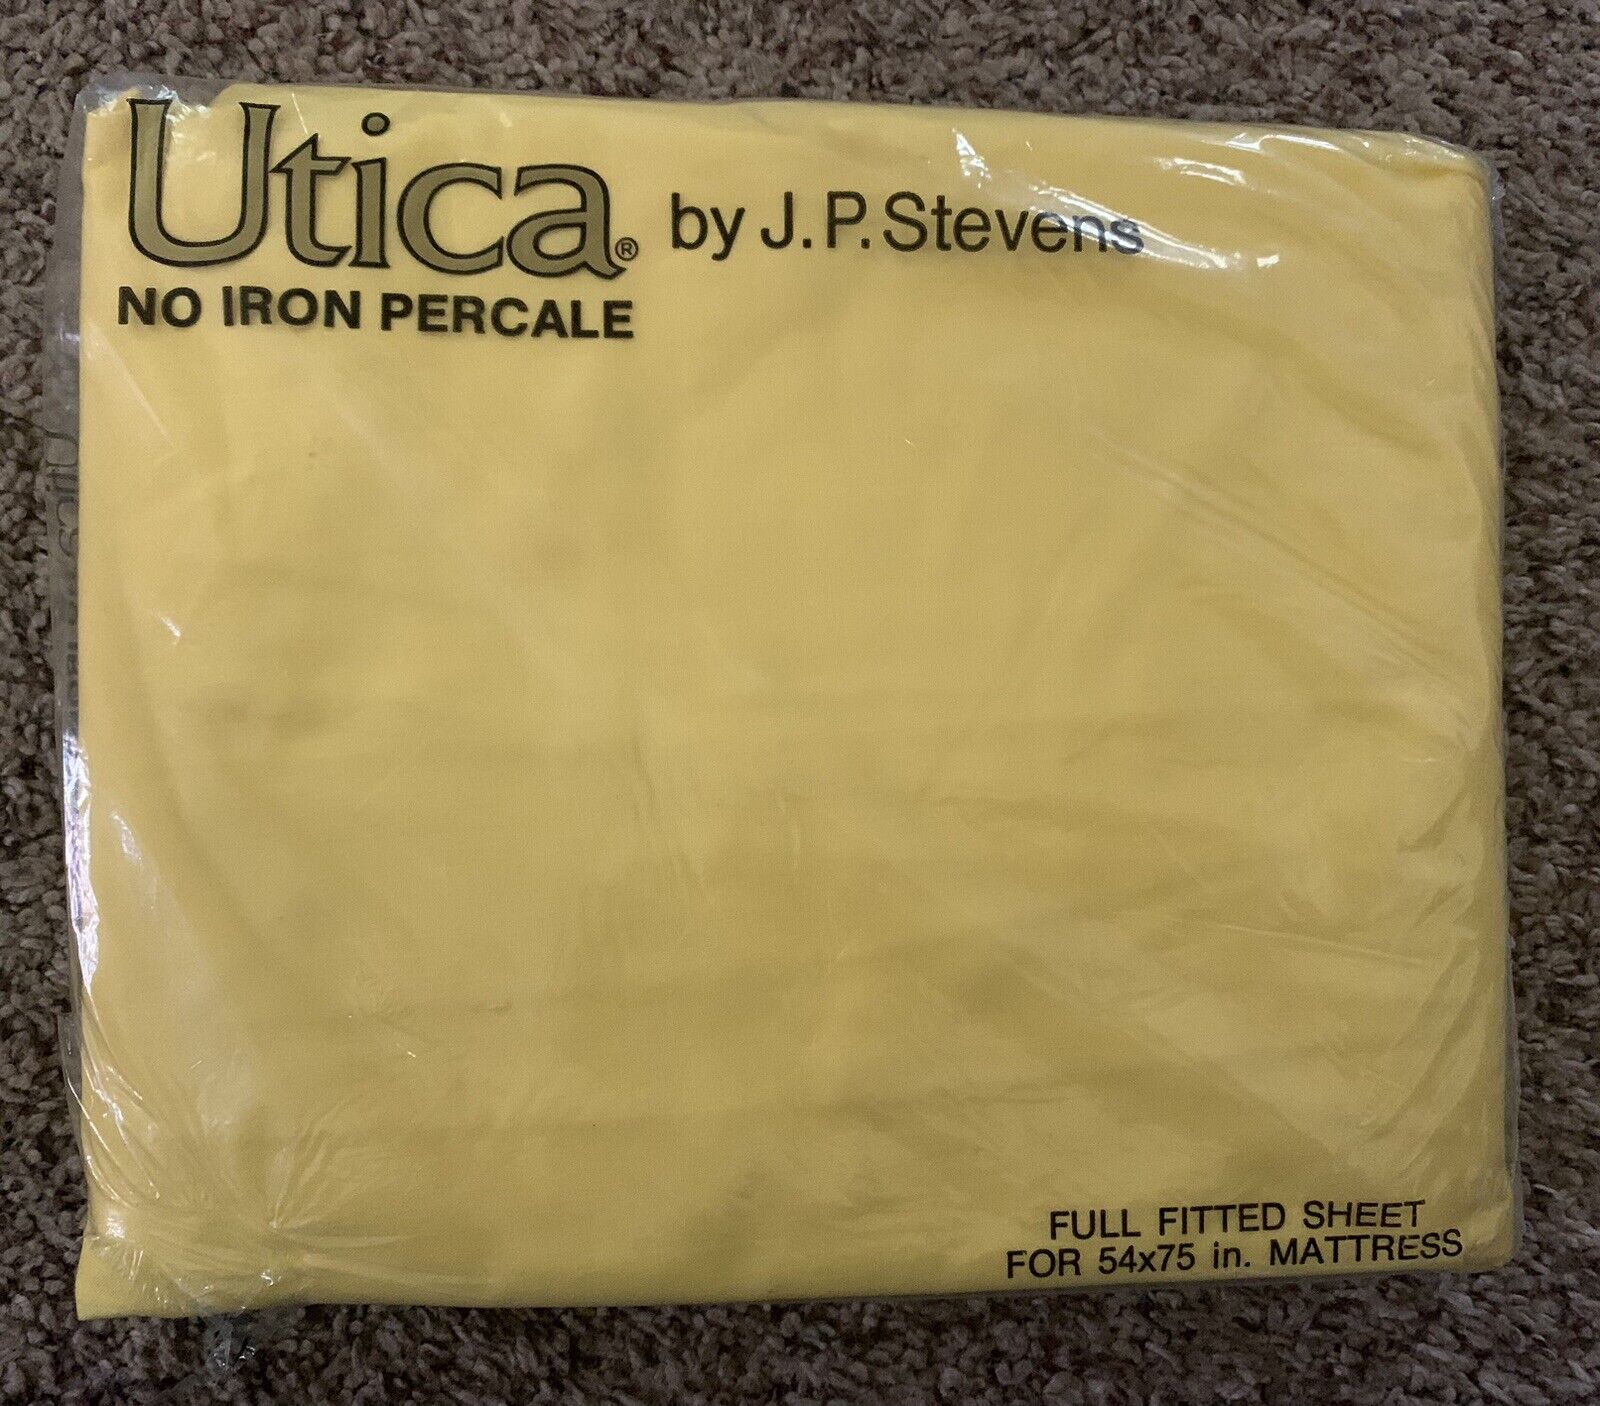 Utica Full Fitted Sheet Yellow No Iron Percale Vintage Cotton Polyester USA Made